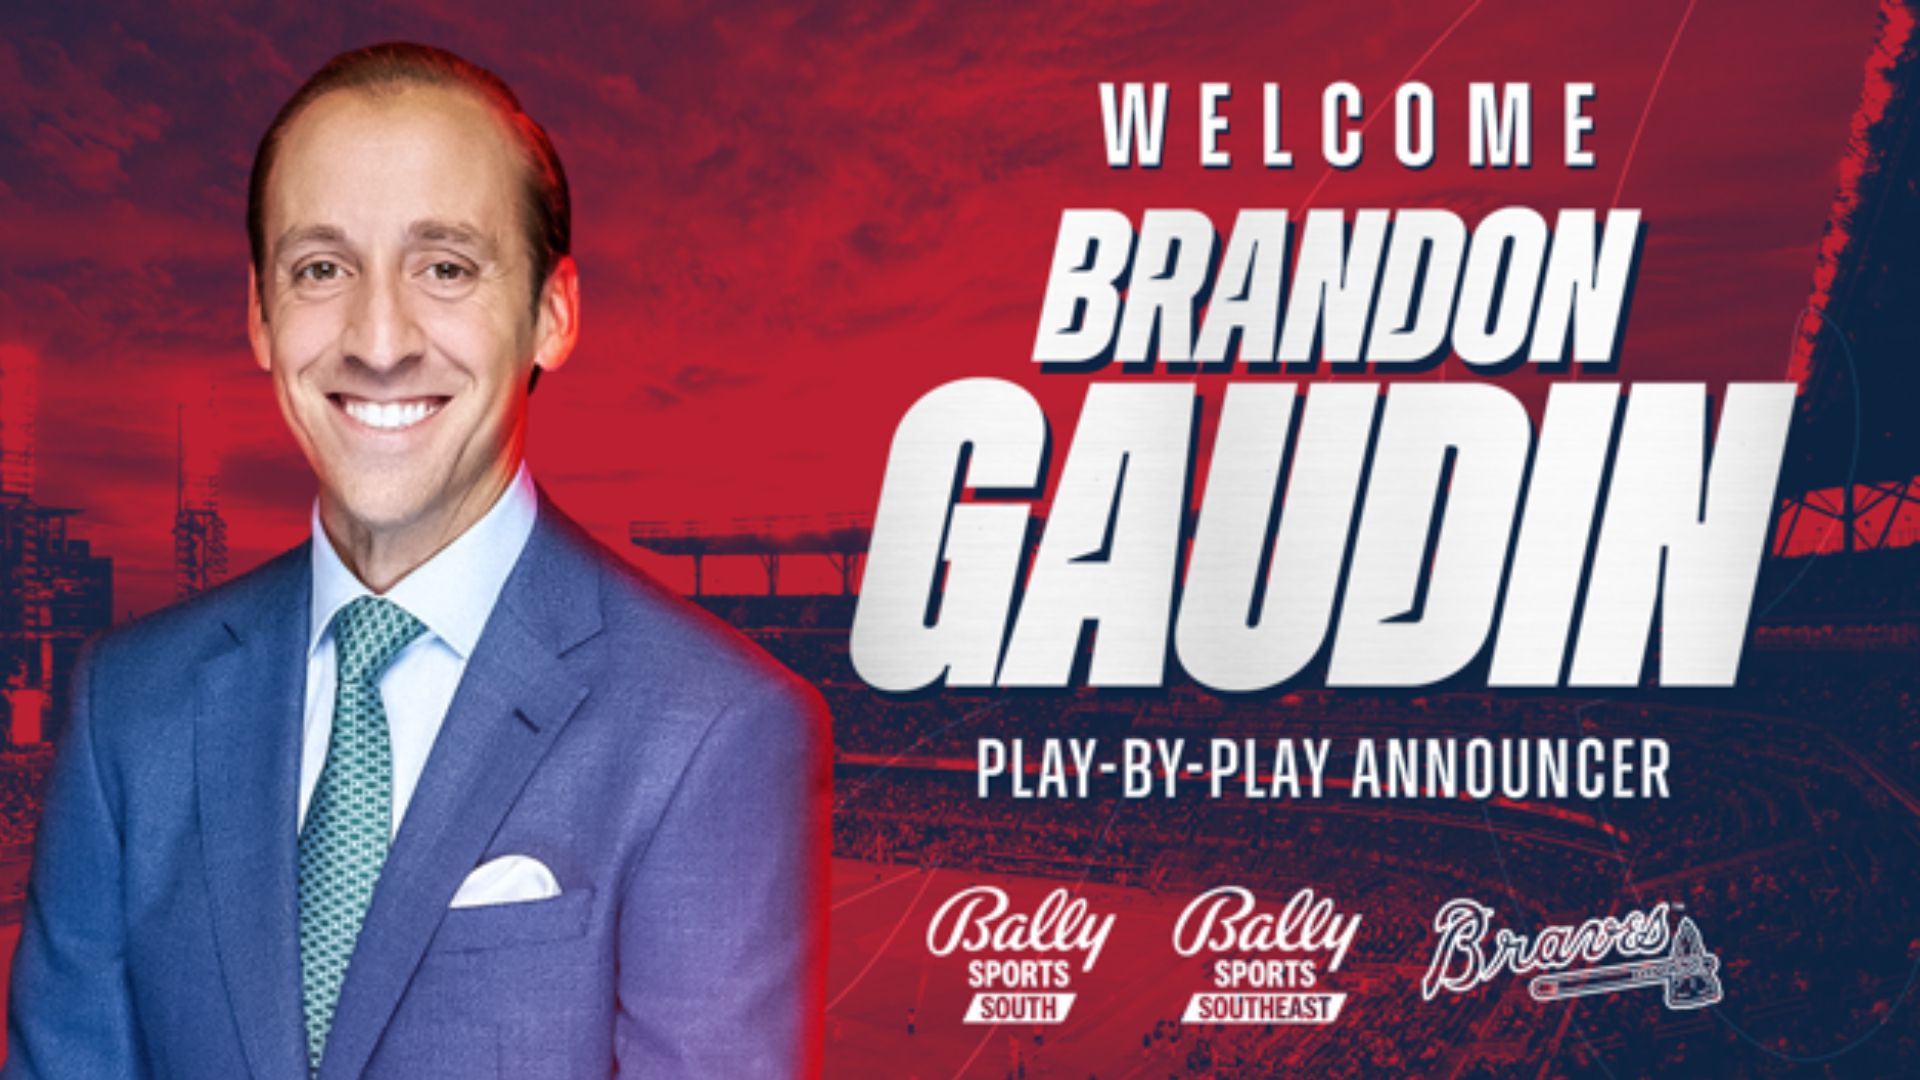 Gaudin to follow Caray as Braves' new play-by-play announcer